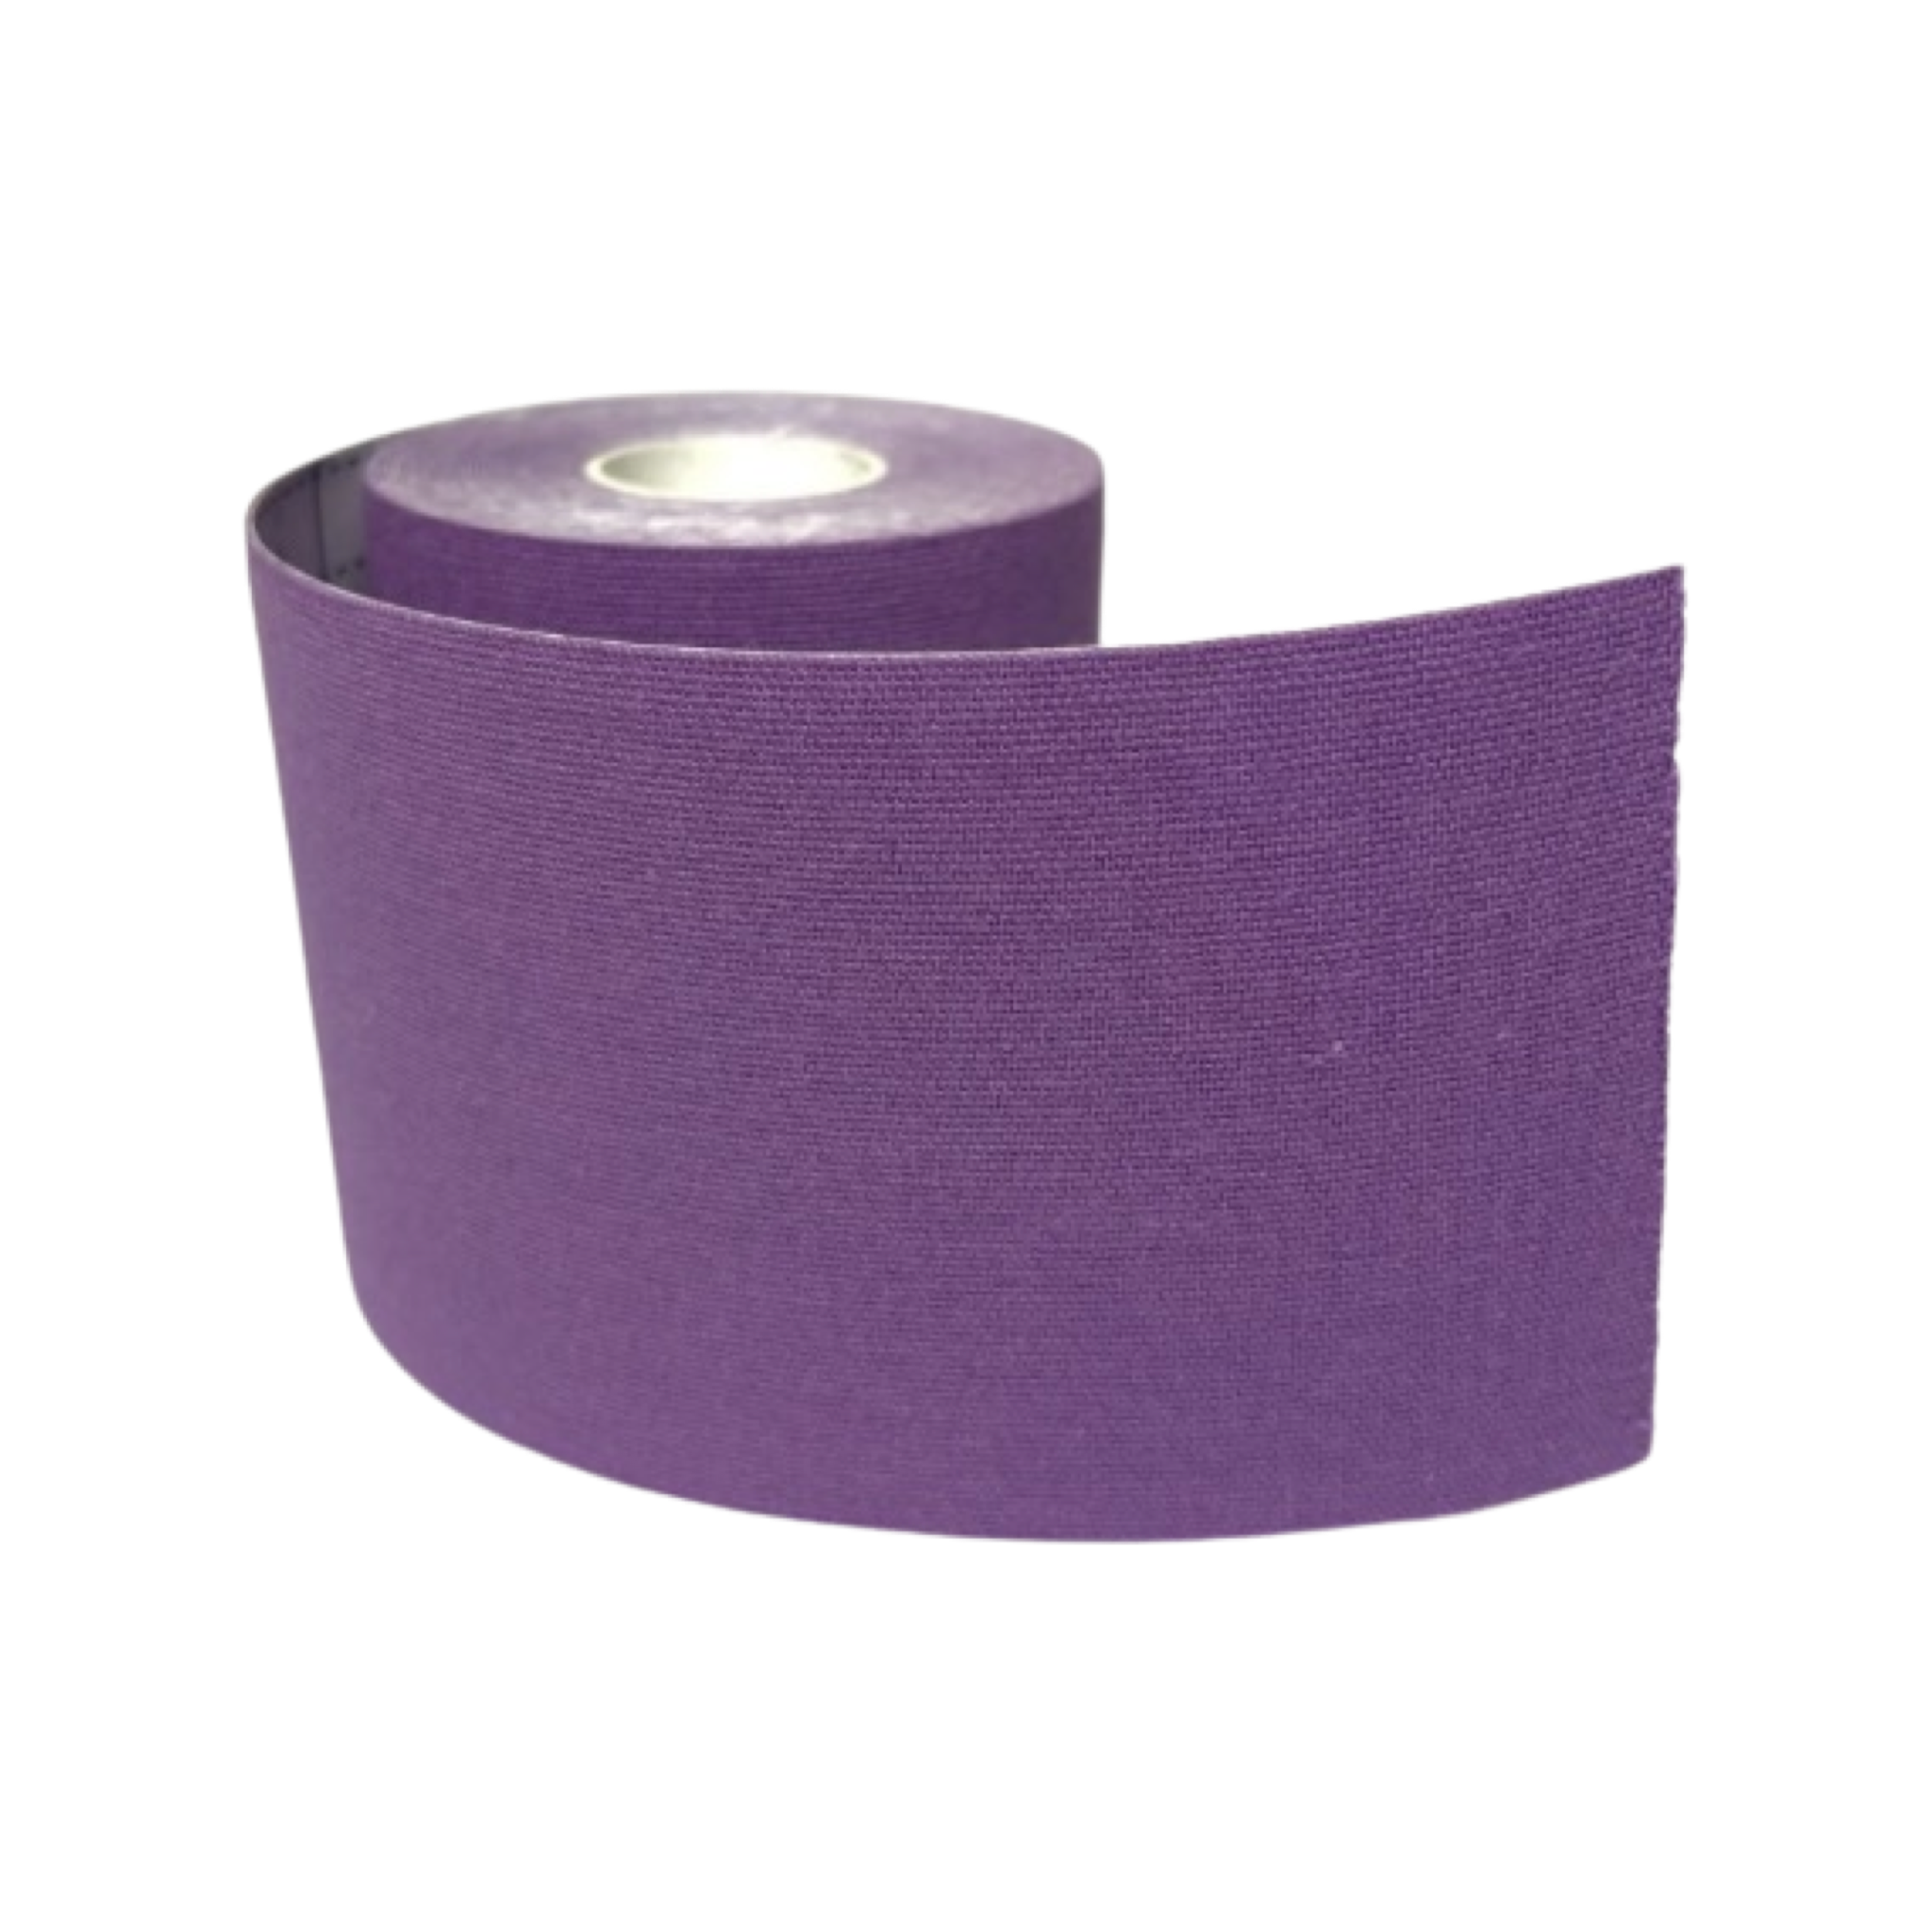 Beastfoot Turf tape - Synthetic turf protective tape